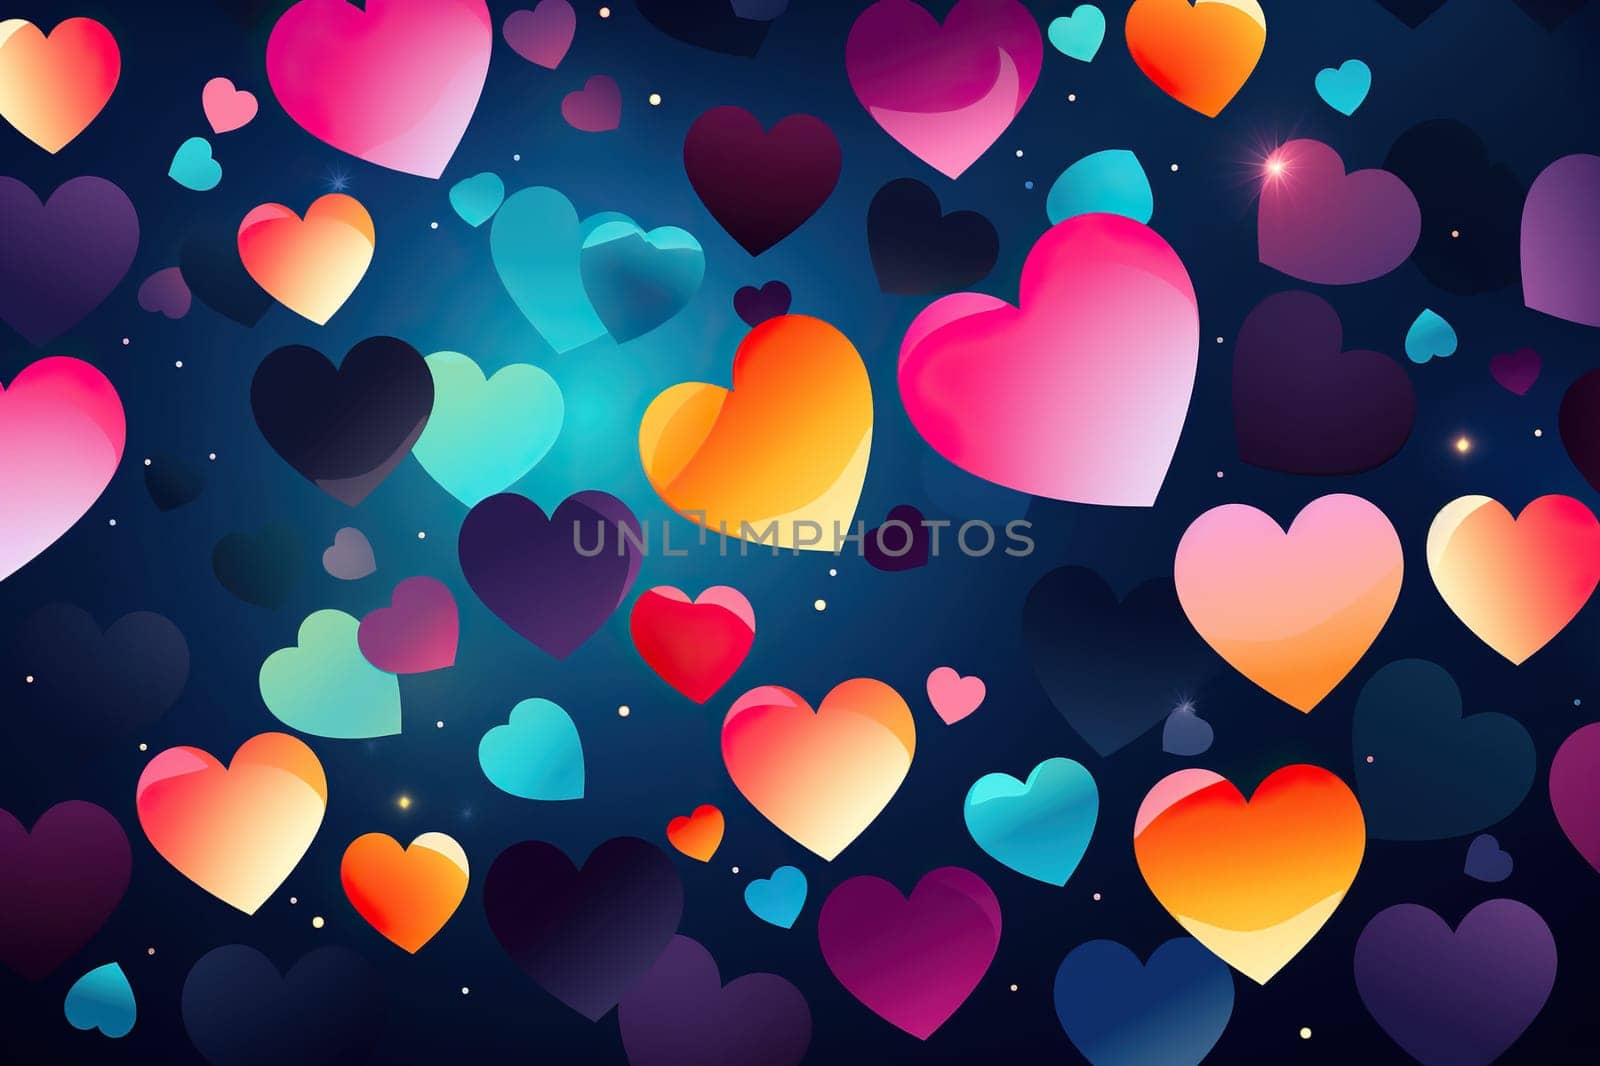 Blue horizontal background with colored hearts.